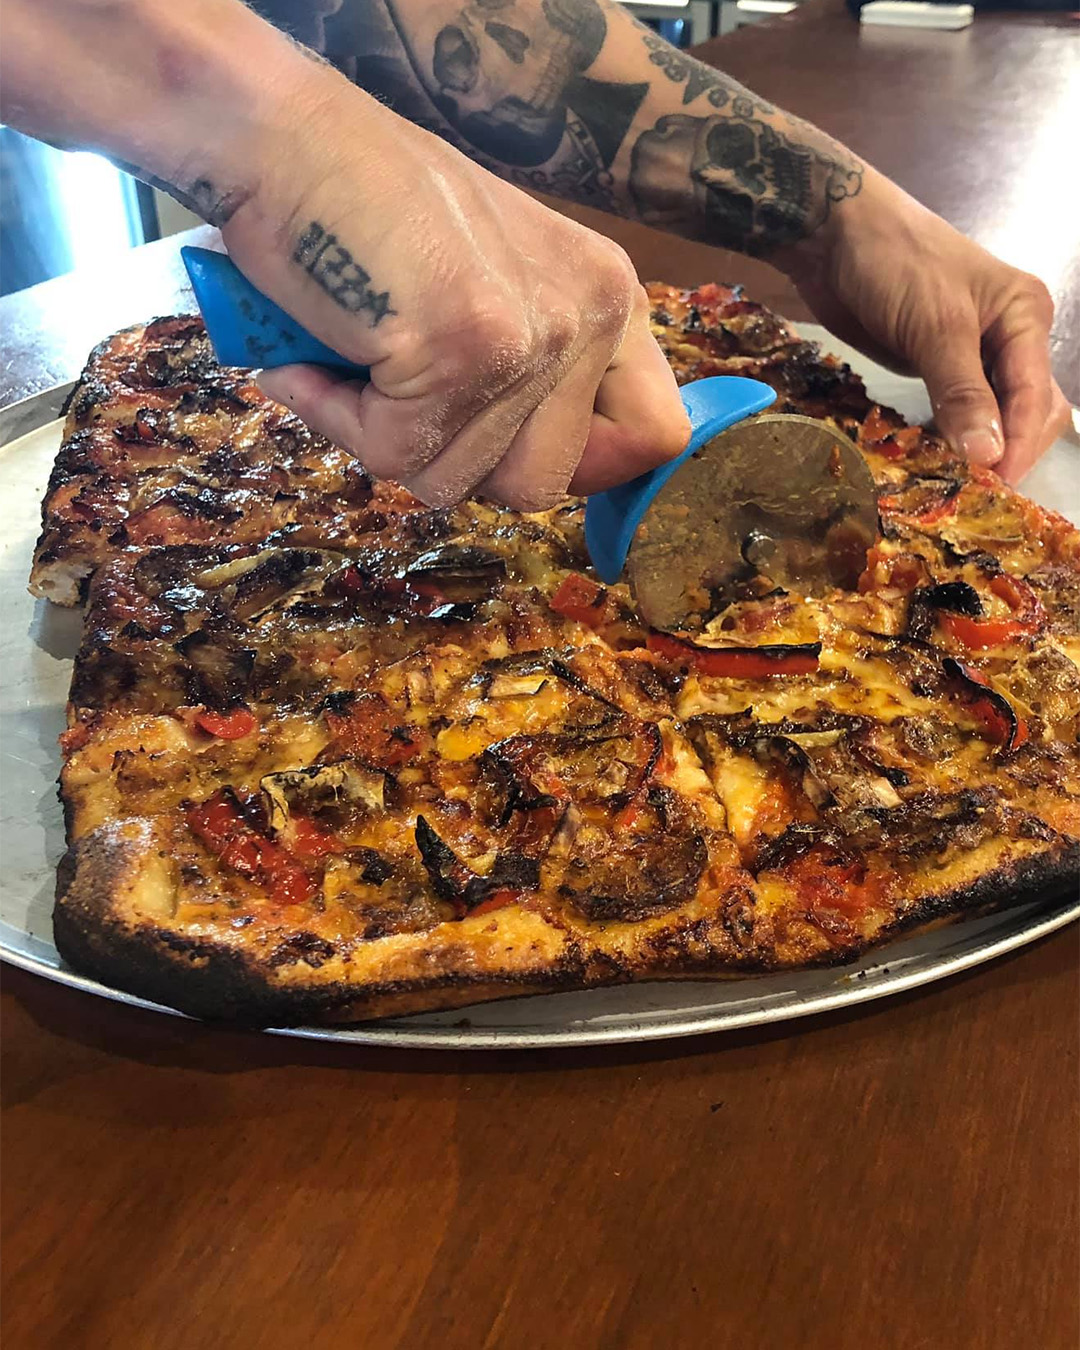 A hand slices a delicious looking pizza at Epolito's.